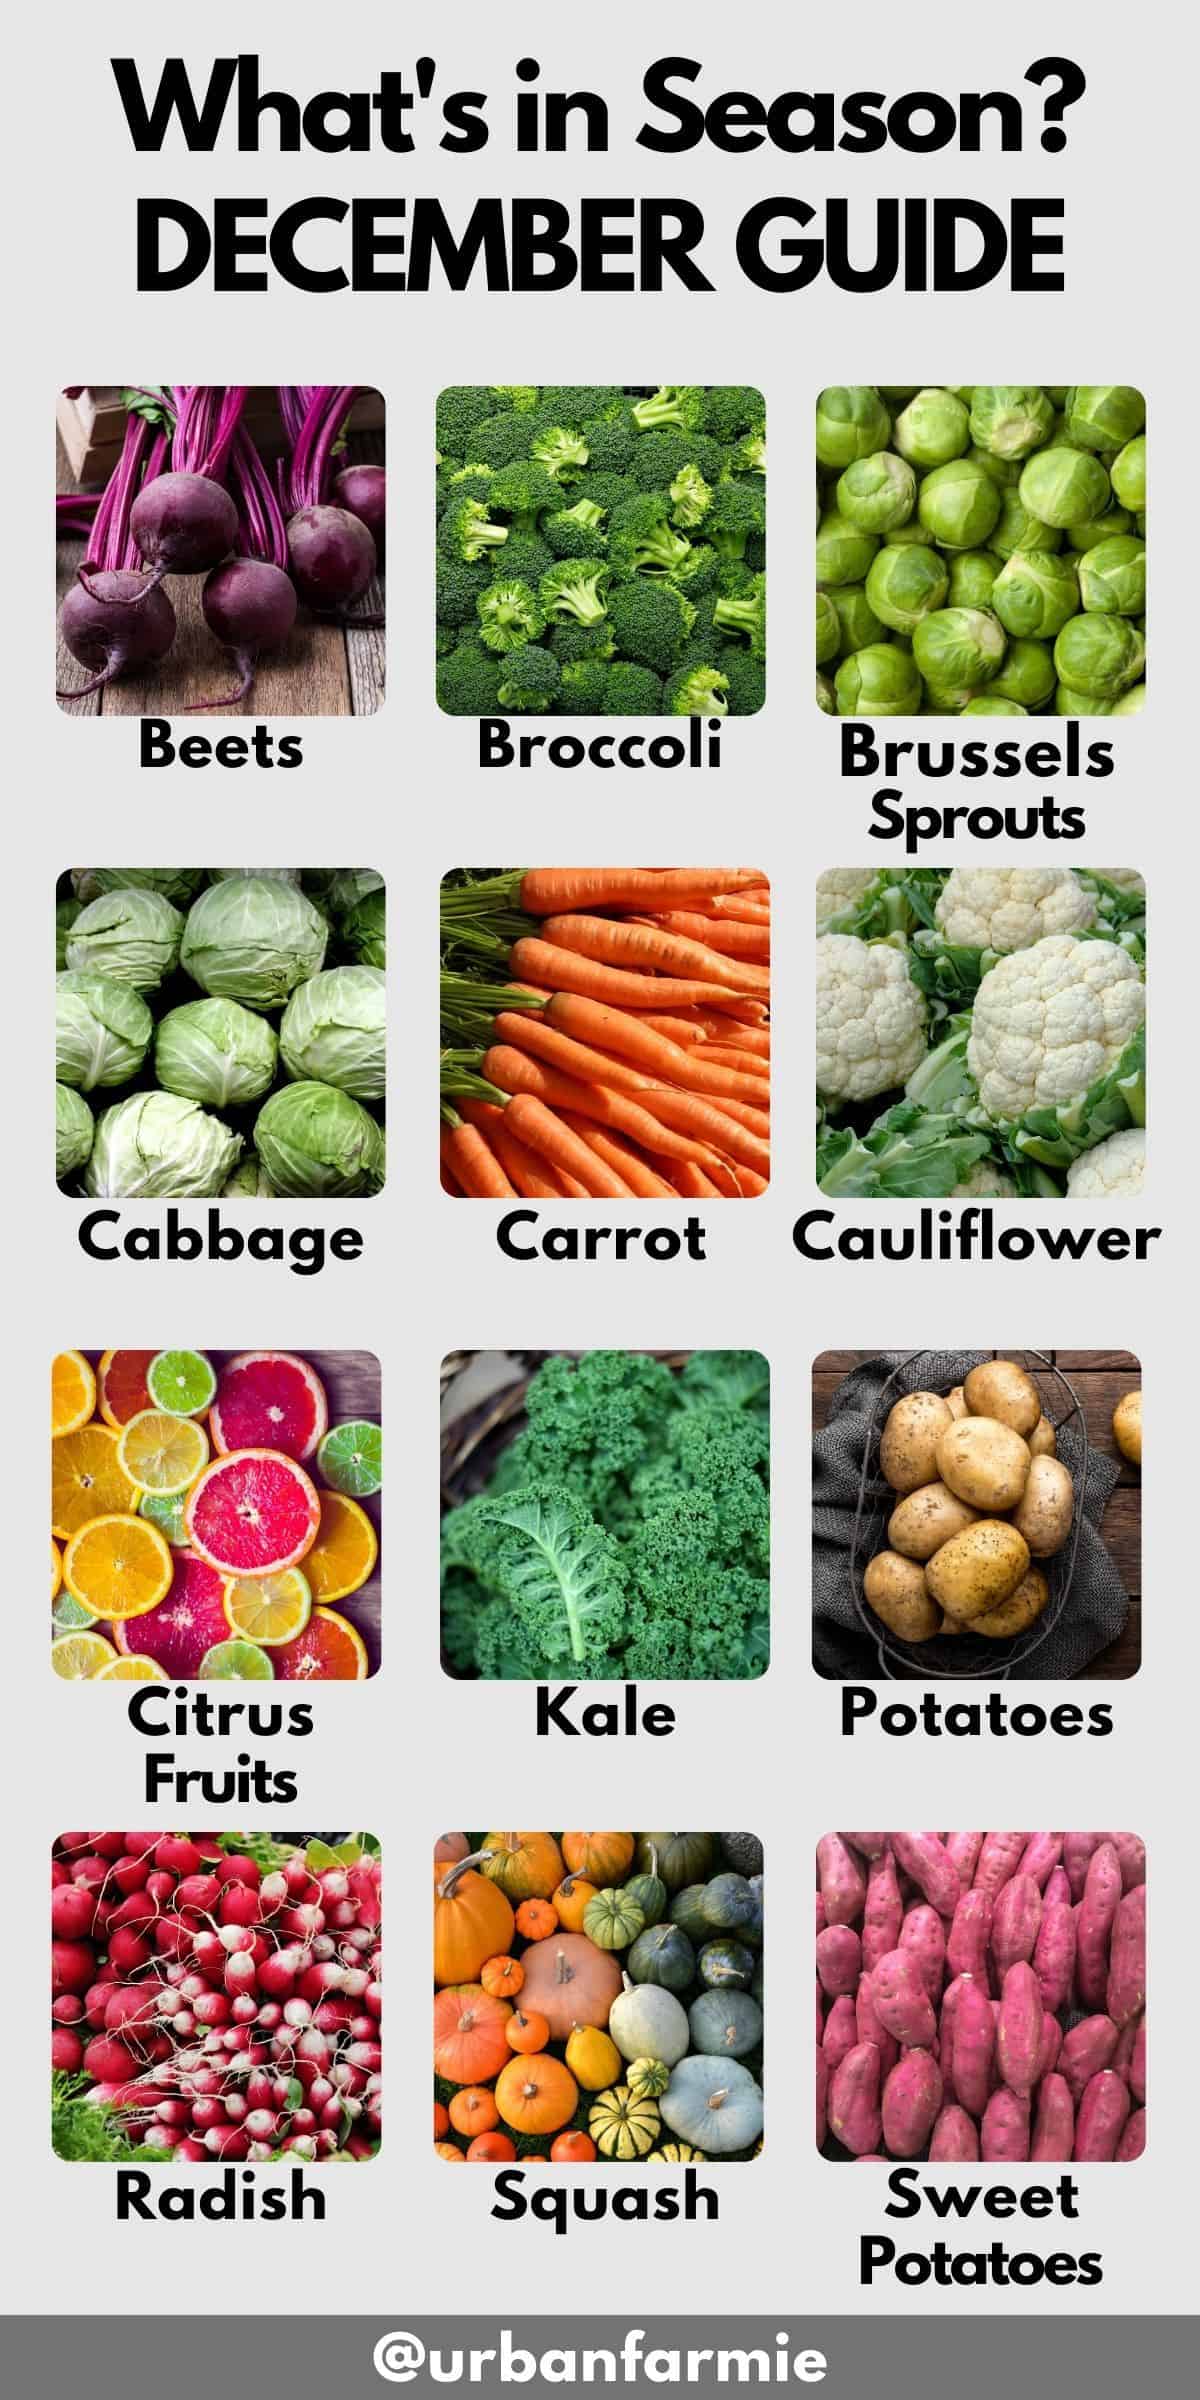 December produce guide showing Collage of the most common fruits and vegetables in season